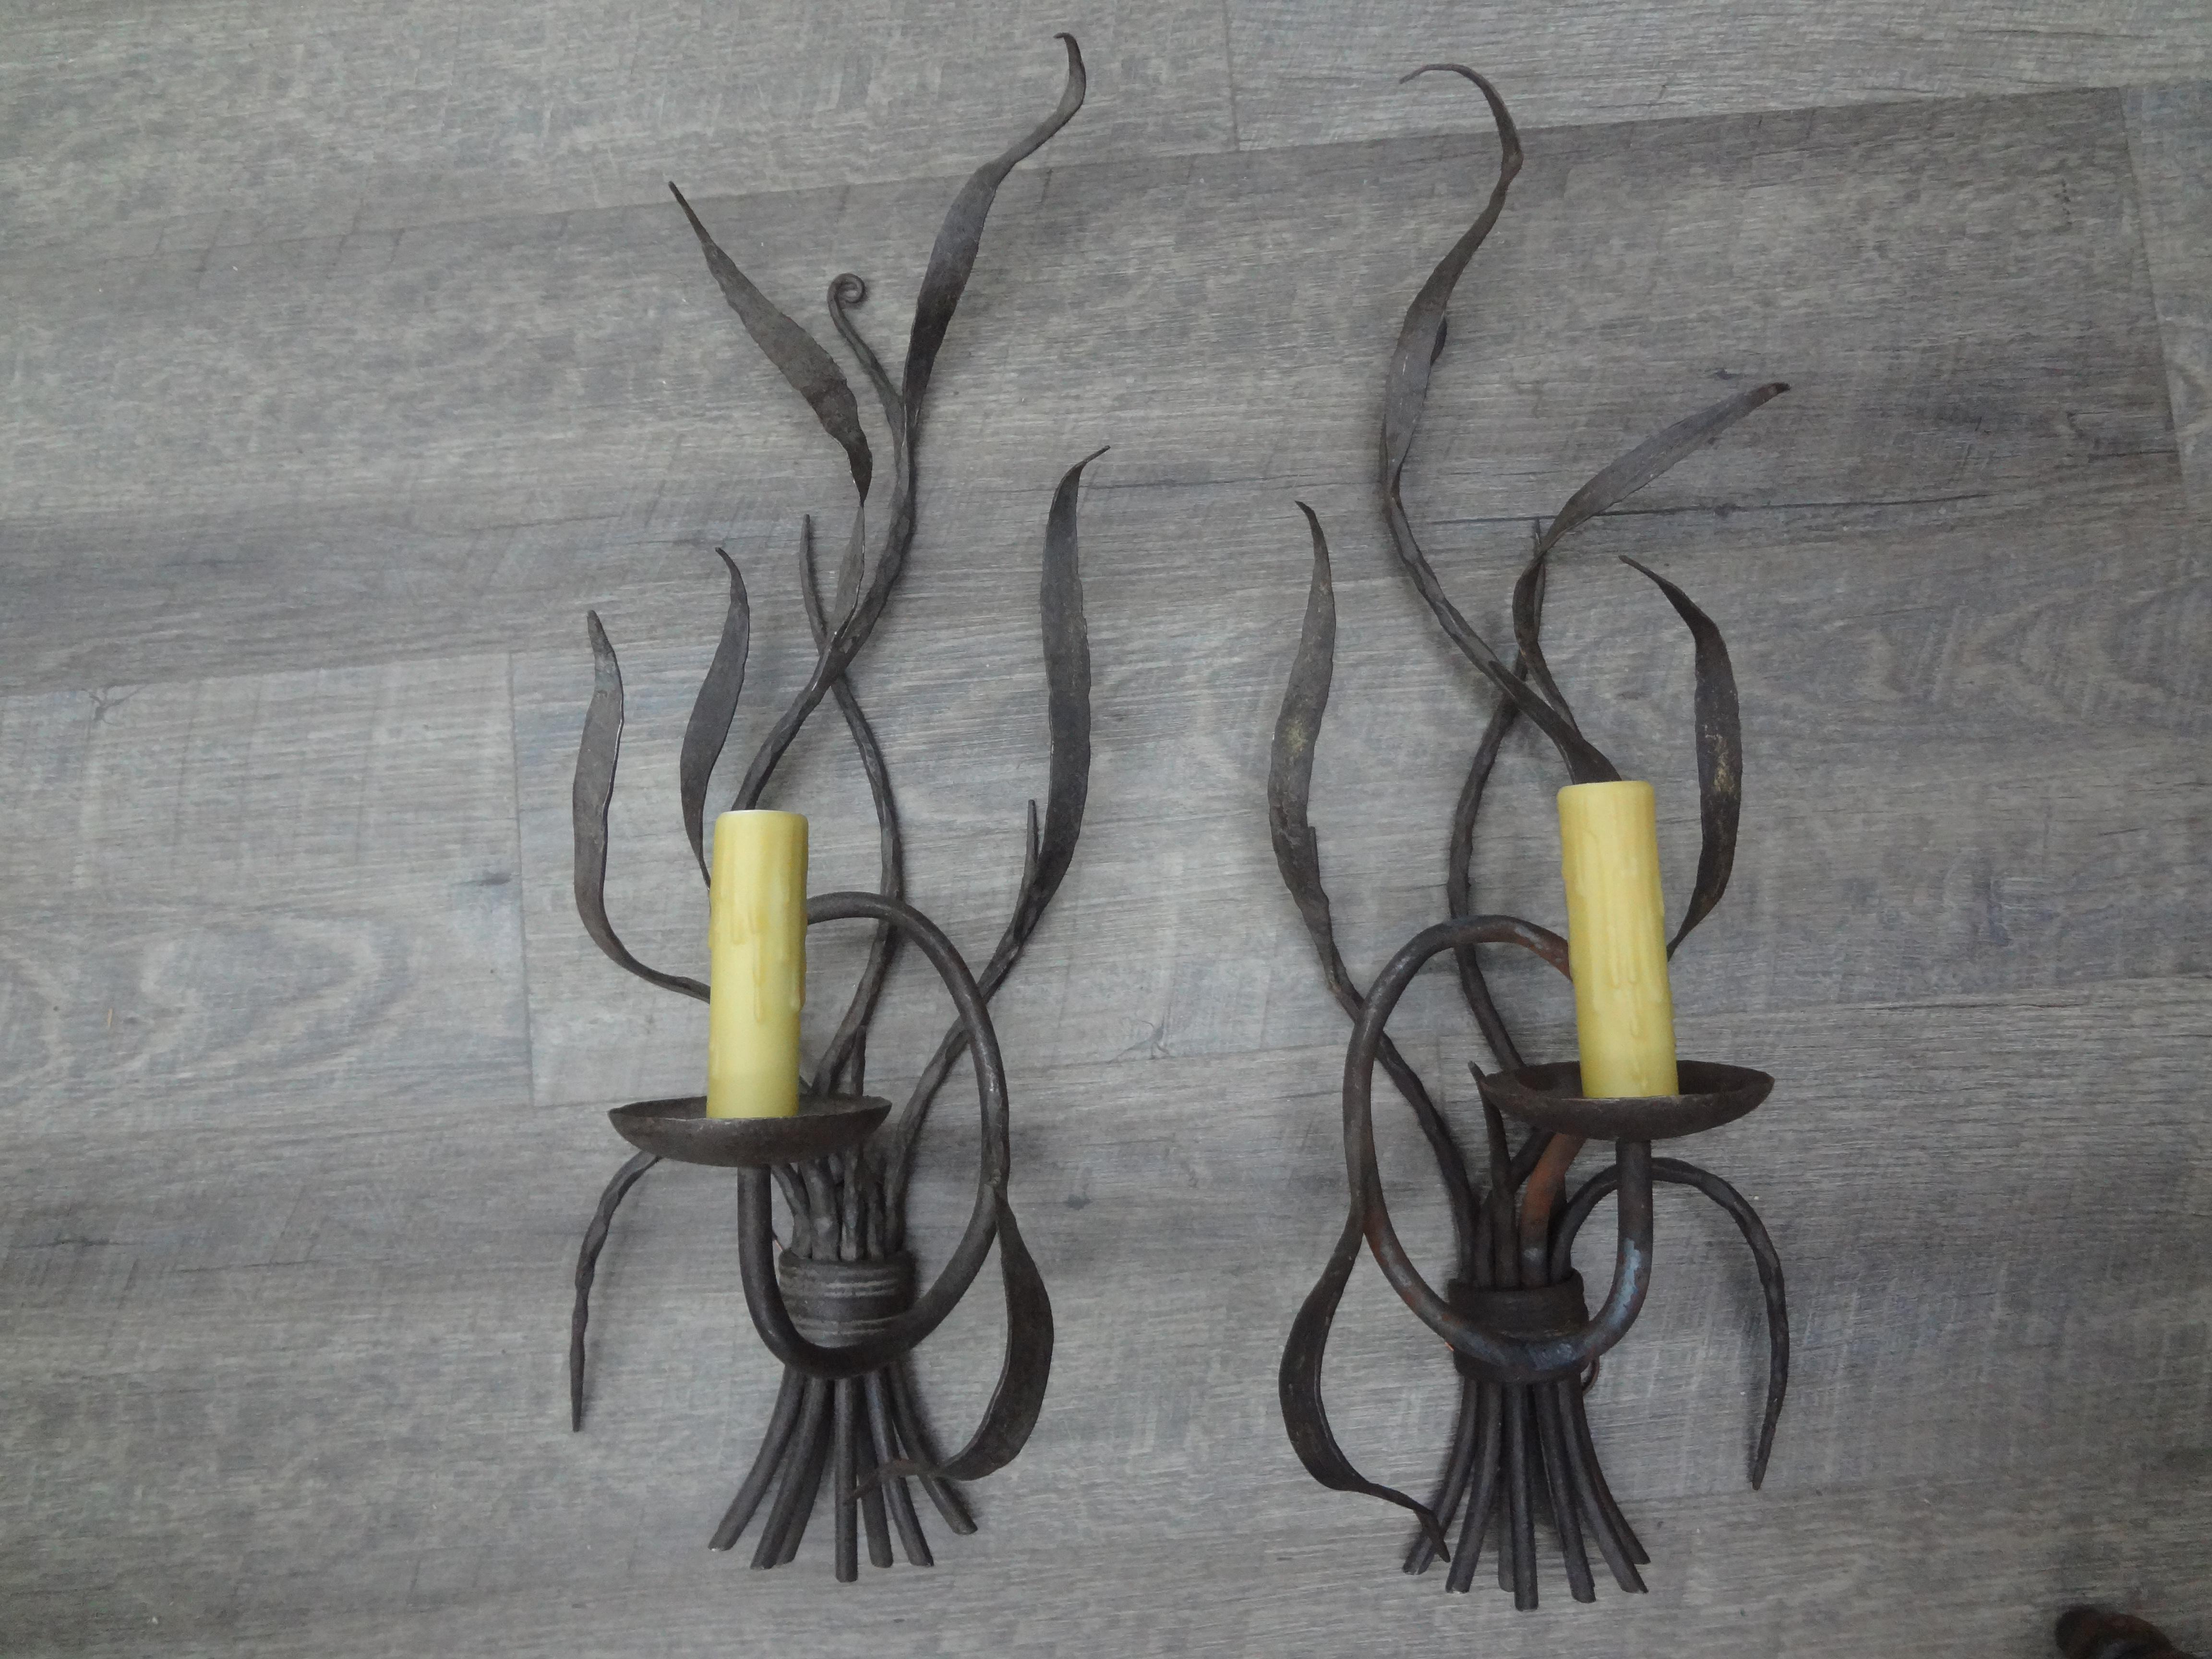 Pair of French wrought iron sconces.
This lovely pair of French Brutalist style wrought iron sconces each feature a single candelabra socket with polywax sleves. Our featured sconces have been newly wired with new sockets for the U.S. market.
Great